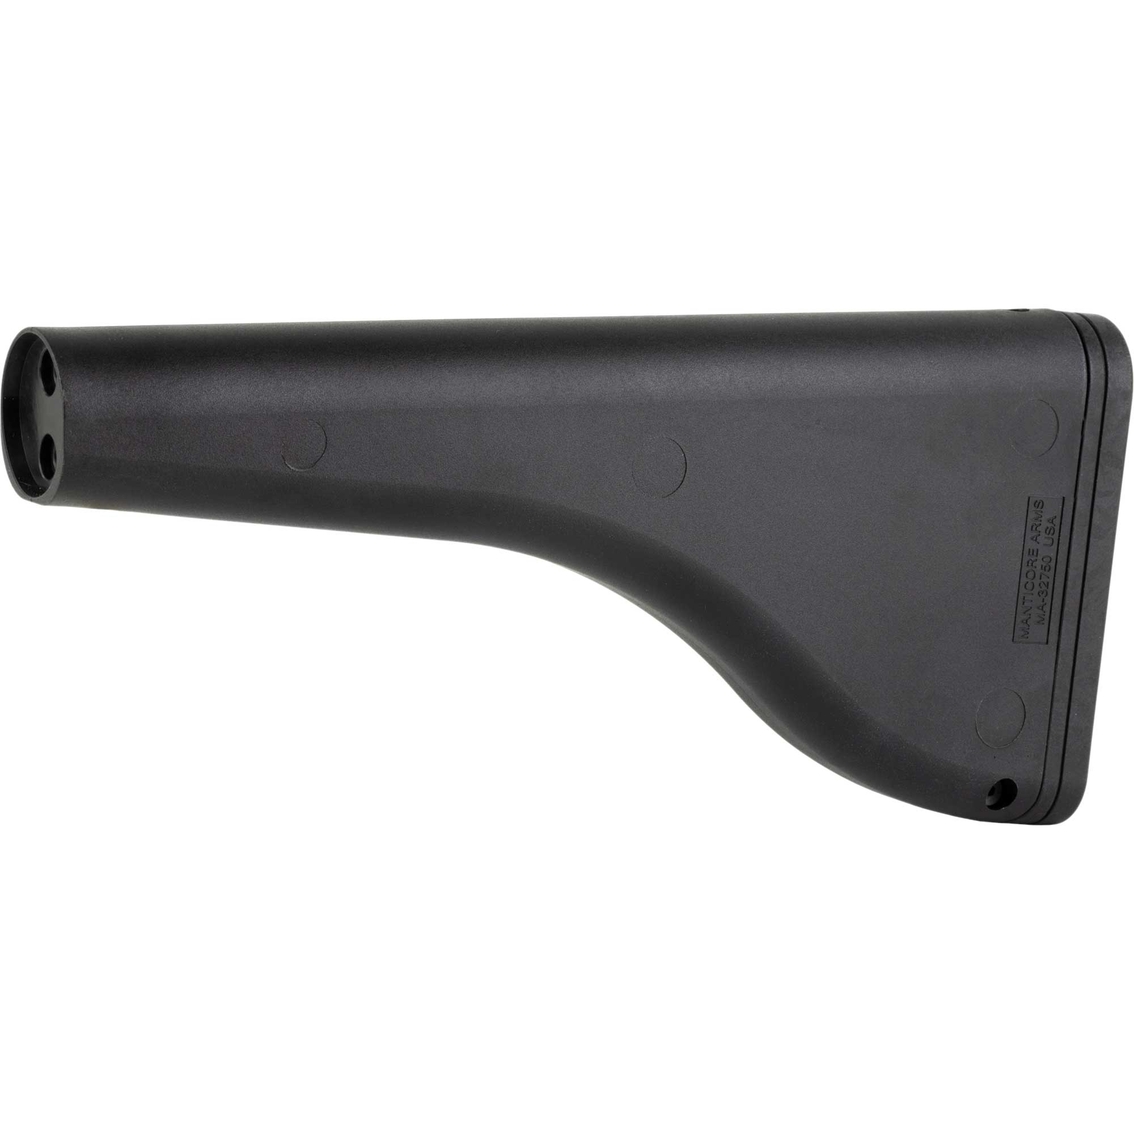 Manticore Arms Fixed Trapdoor Stock Fits Yugo M85/M92 Rifle Black - Image 3 of 3